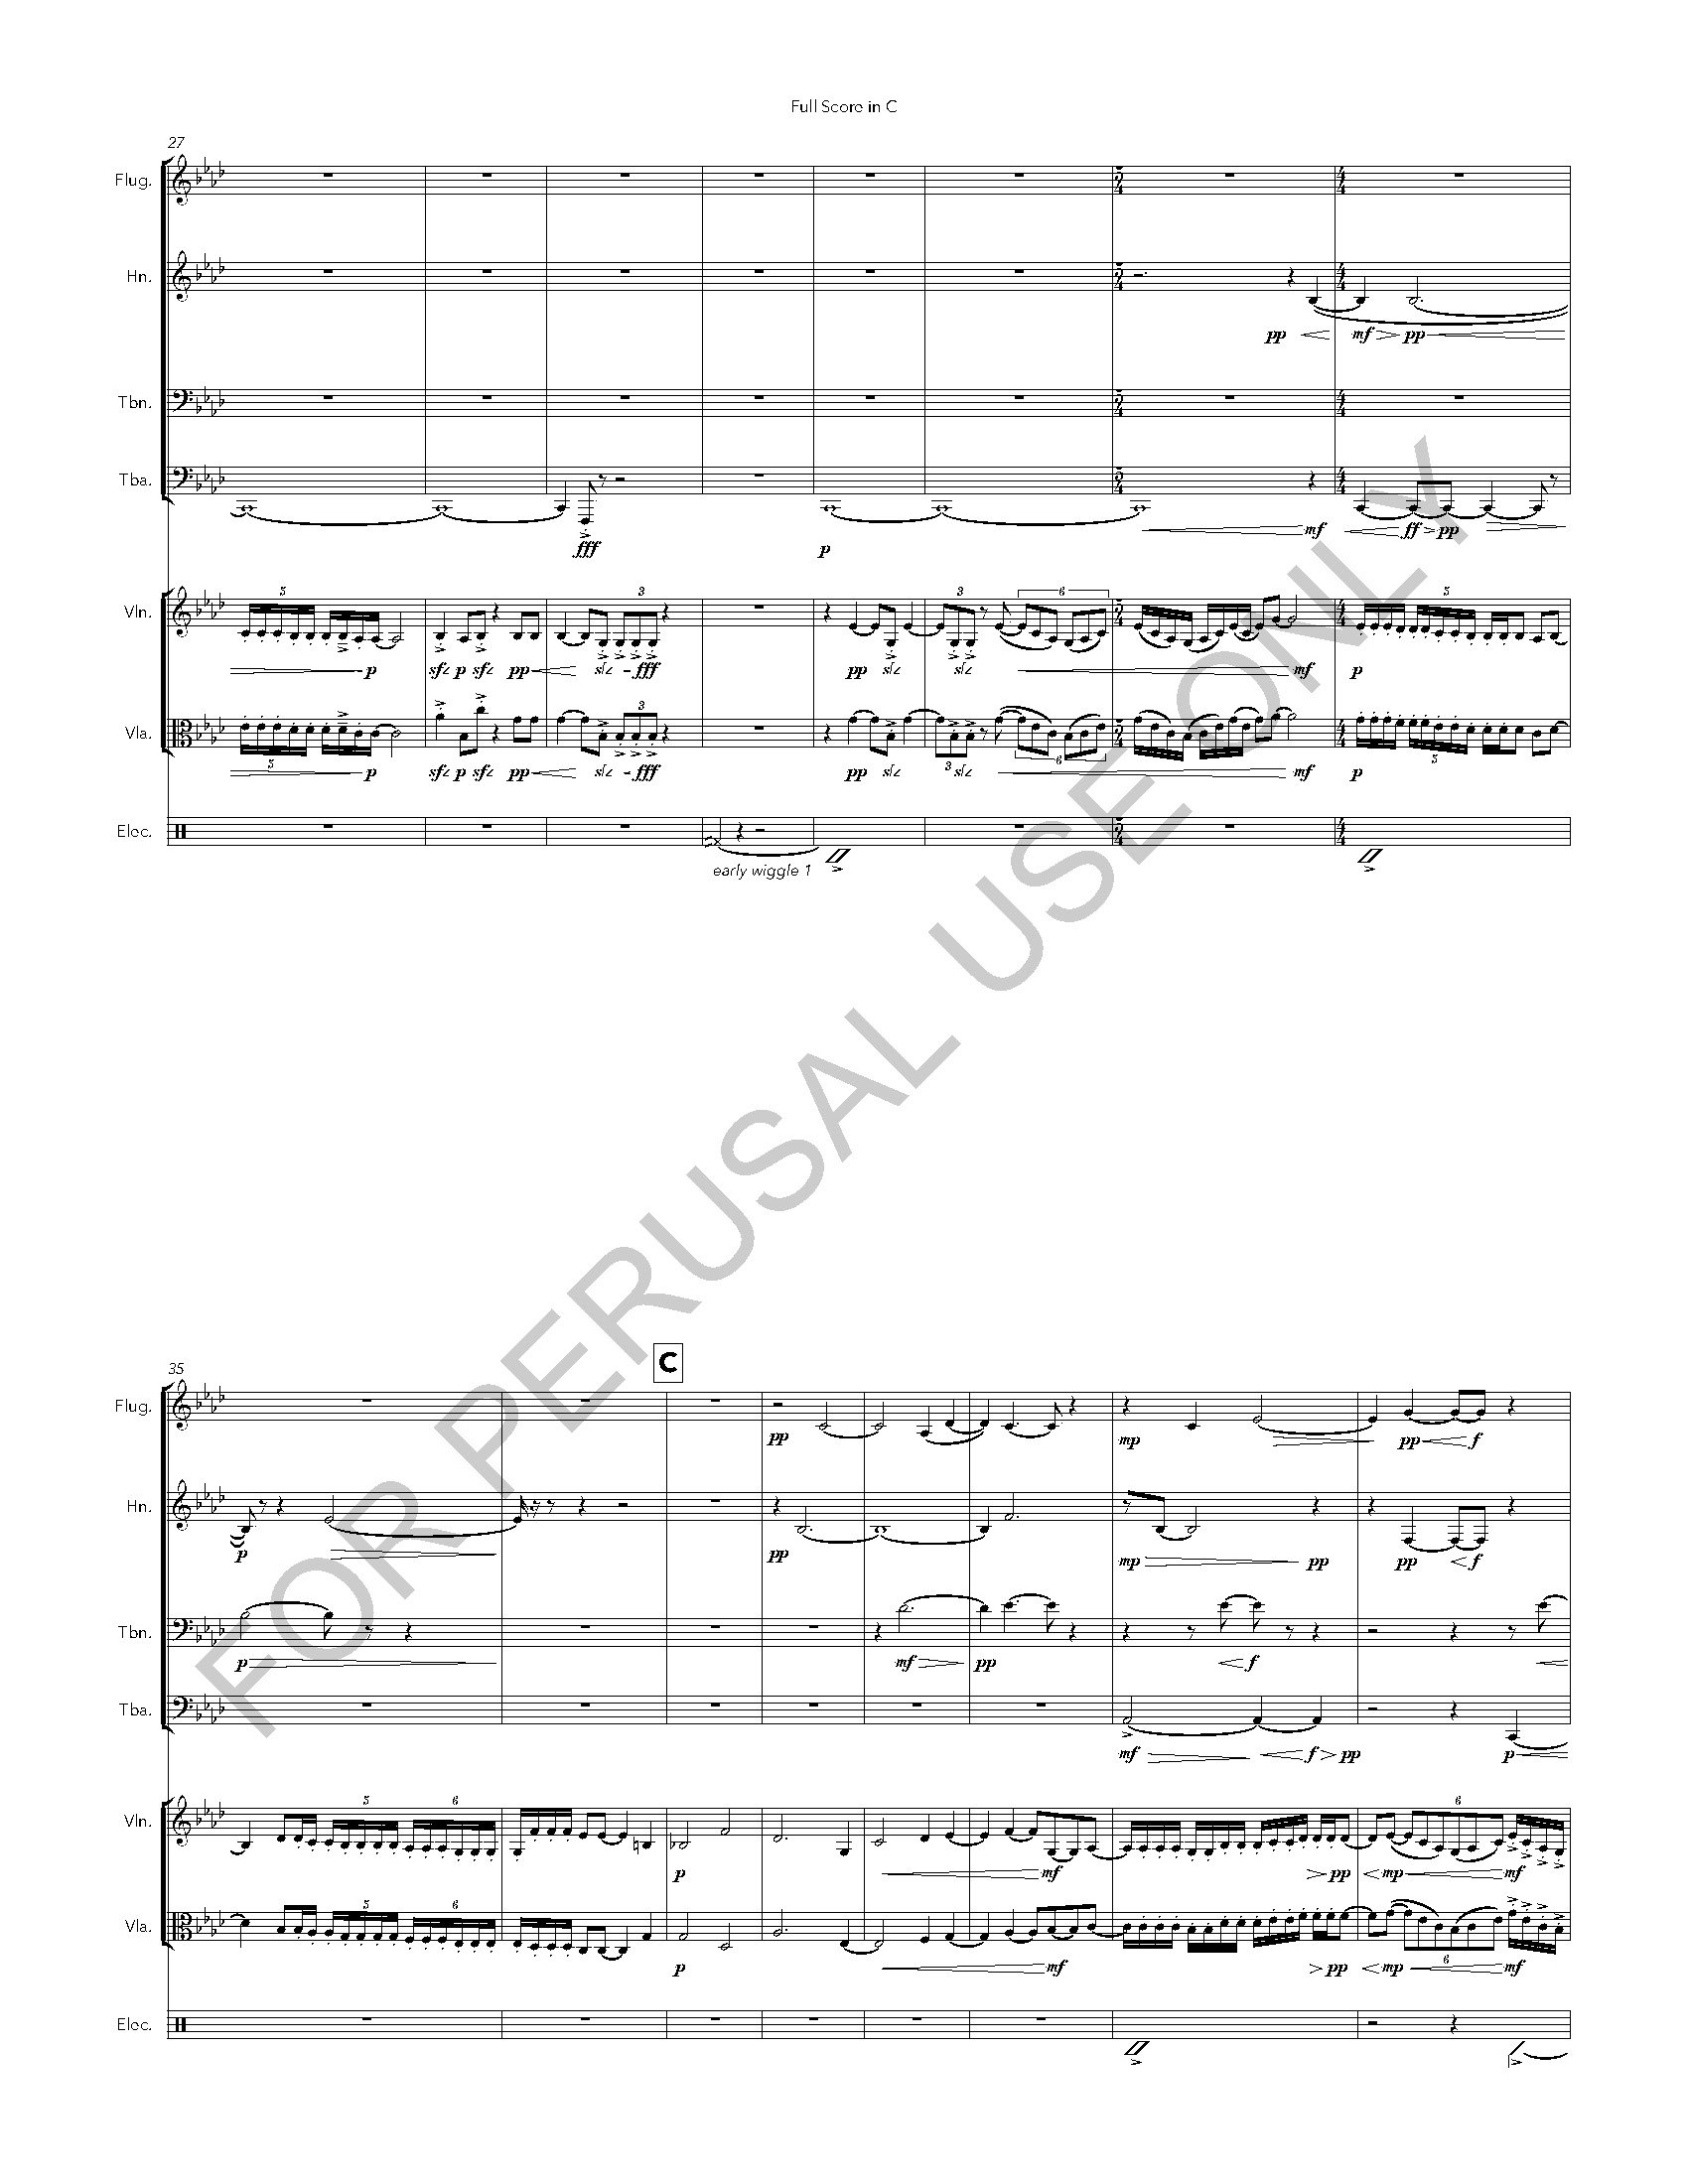 The Other Side of the Sky Full Score in C_Page_04.jpg